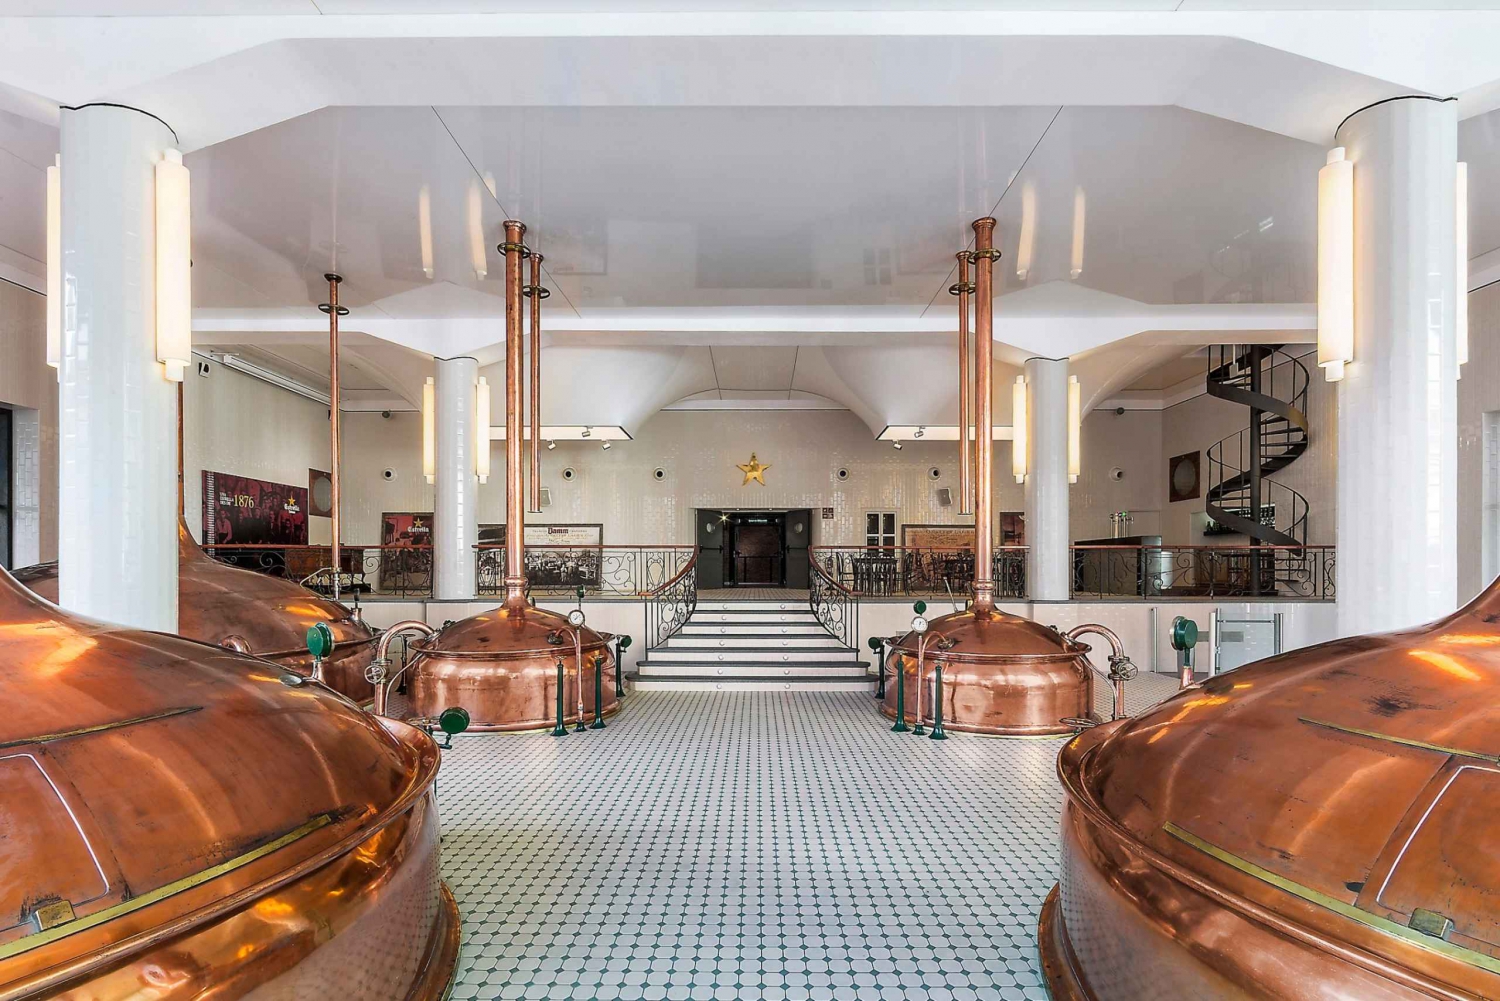 Barcelona: Estrella Damm Old Brewery Tour with Tasting